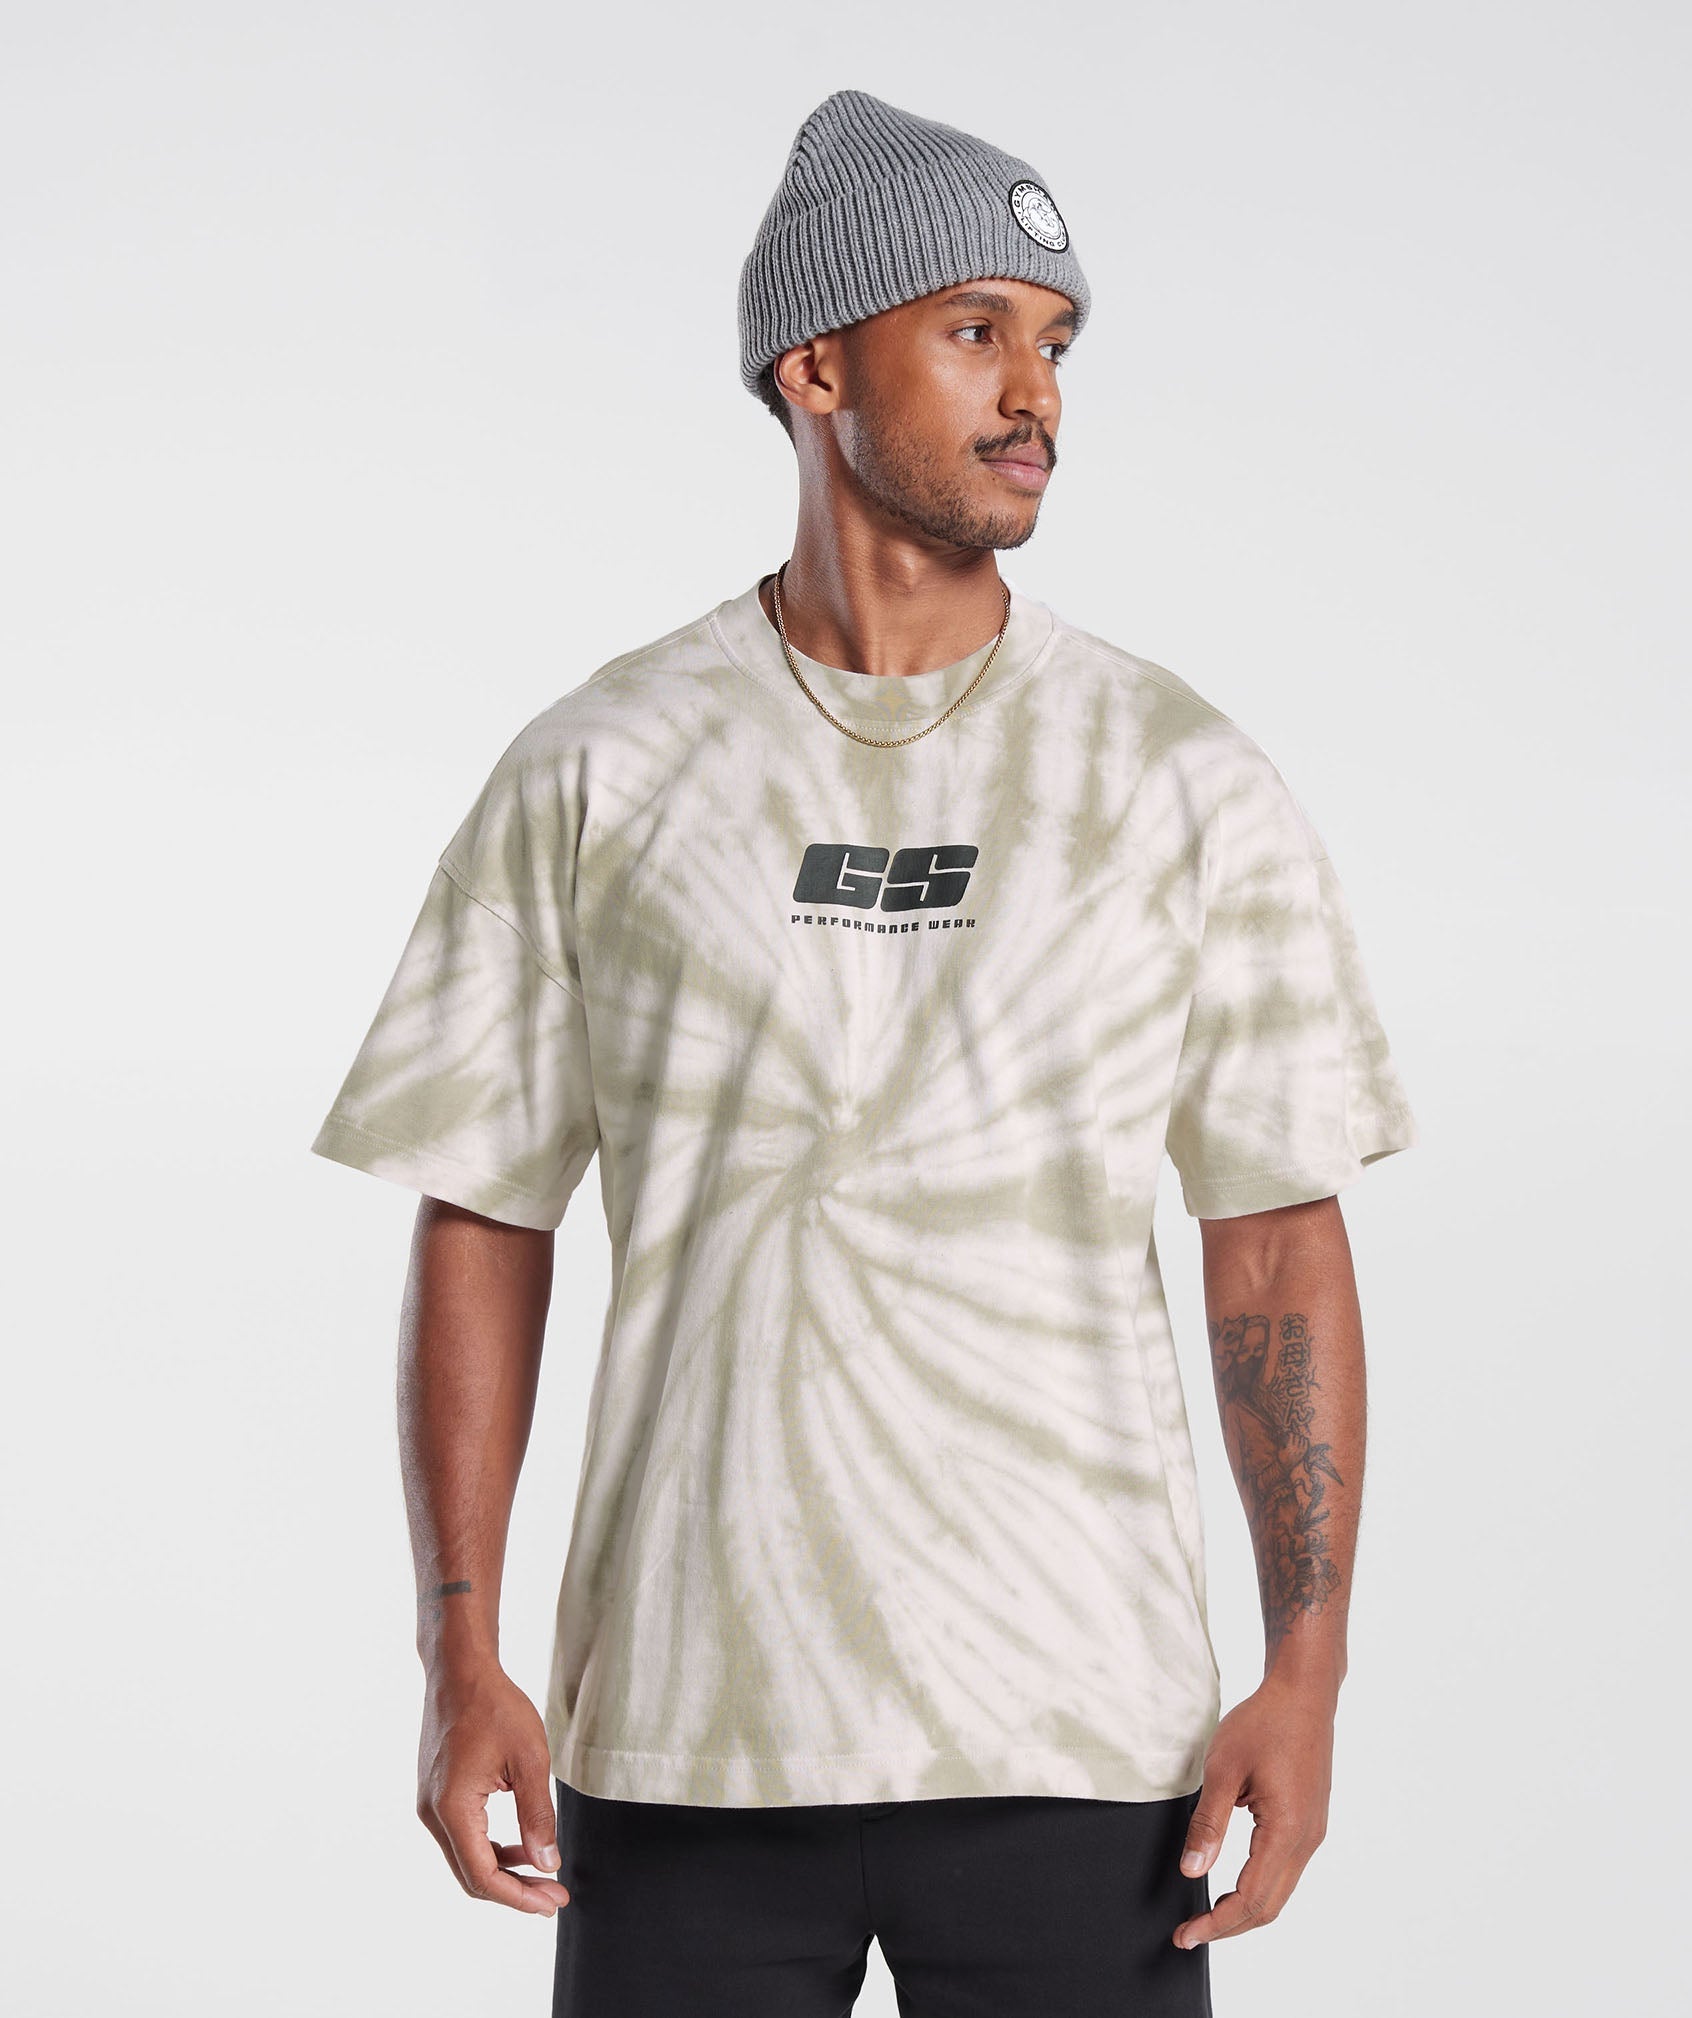 Rest Day T-Shirt in White/Mushroom Brown/Spiral Optic Wash - view 1